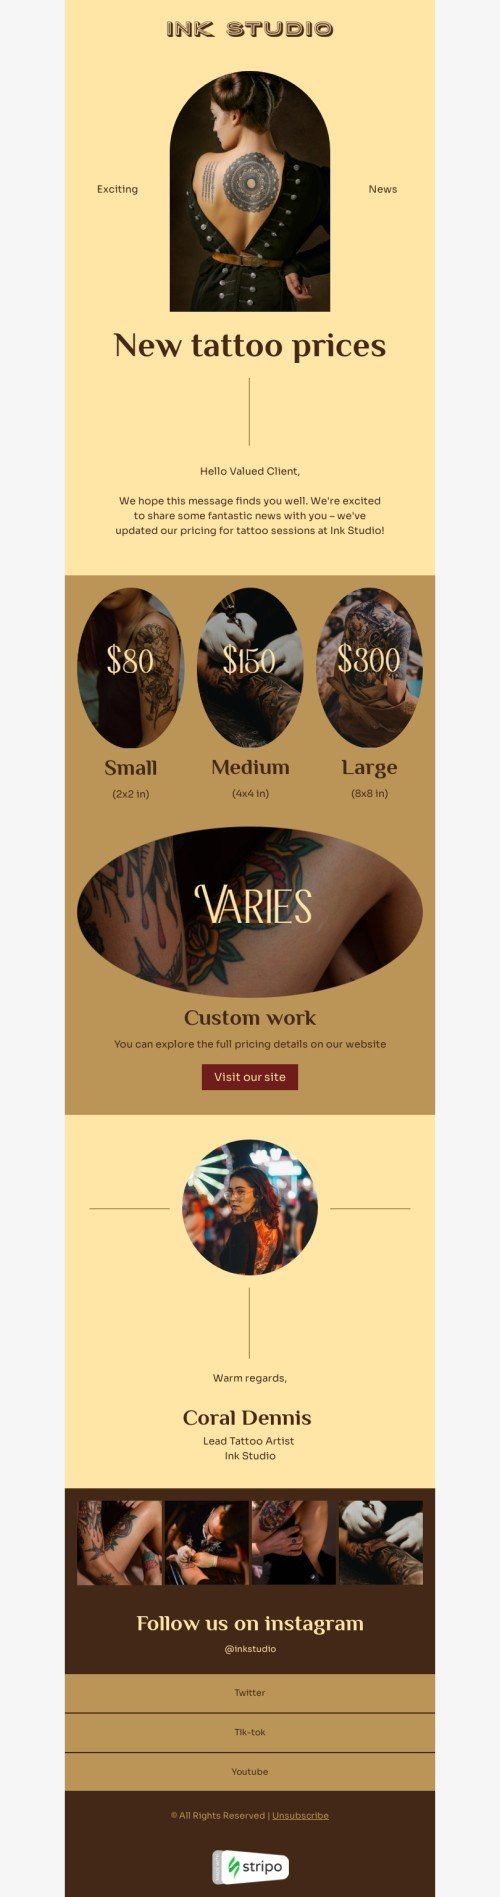 Price list email template "New tattoo prices" for tattoo industry mobile view